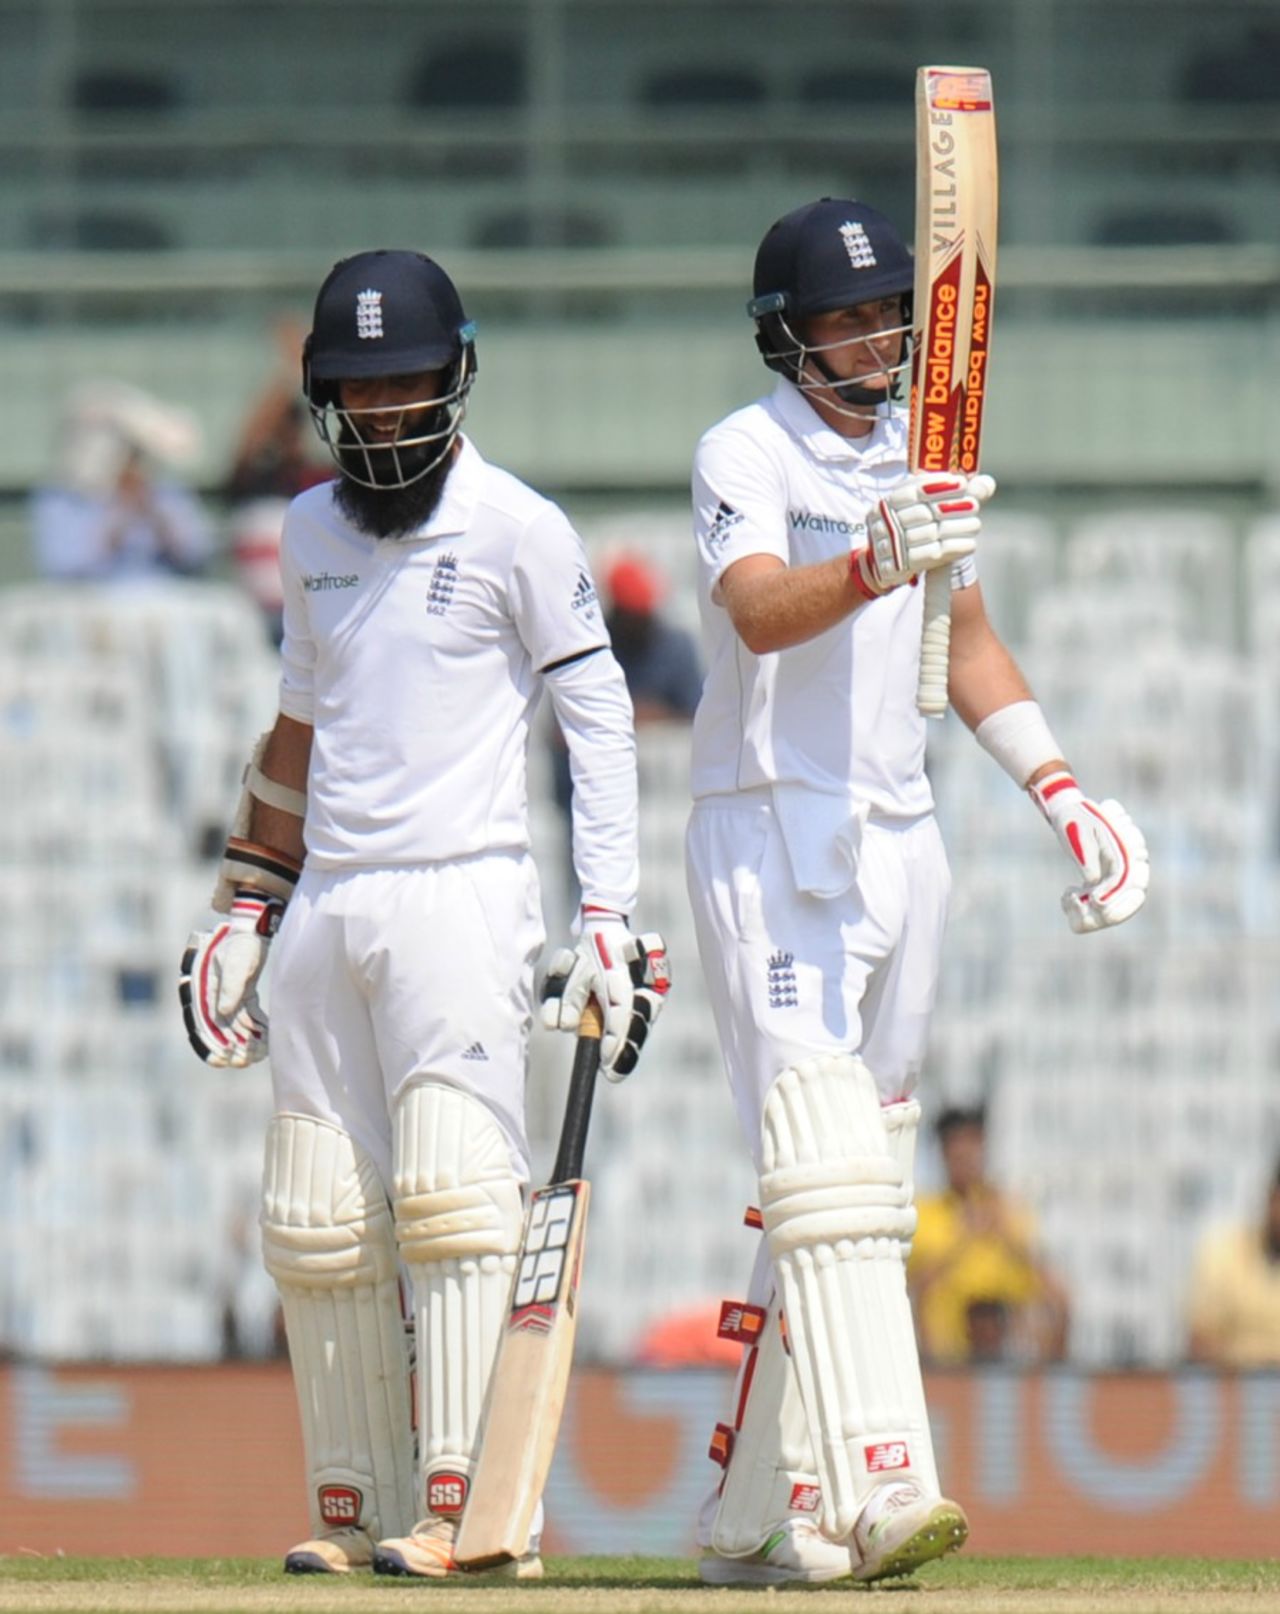 Joe Root struck another half-century, India v England, 5th Test, Chennai, 1st day, December 16, 2016